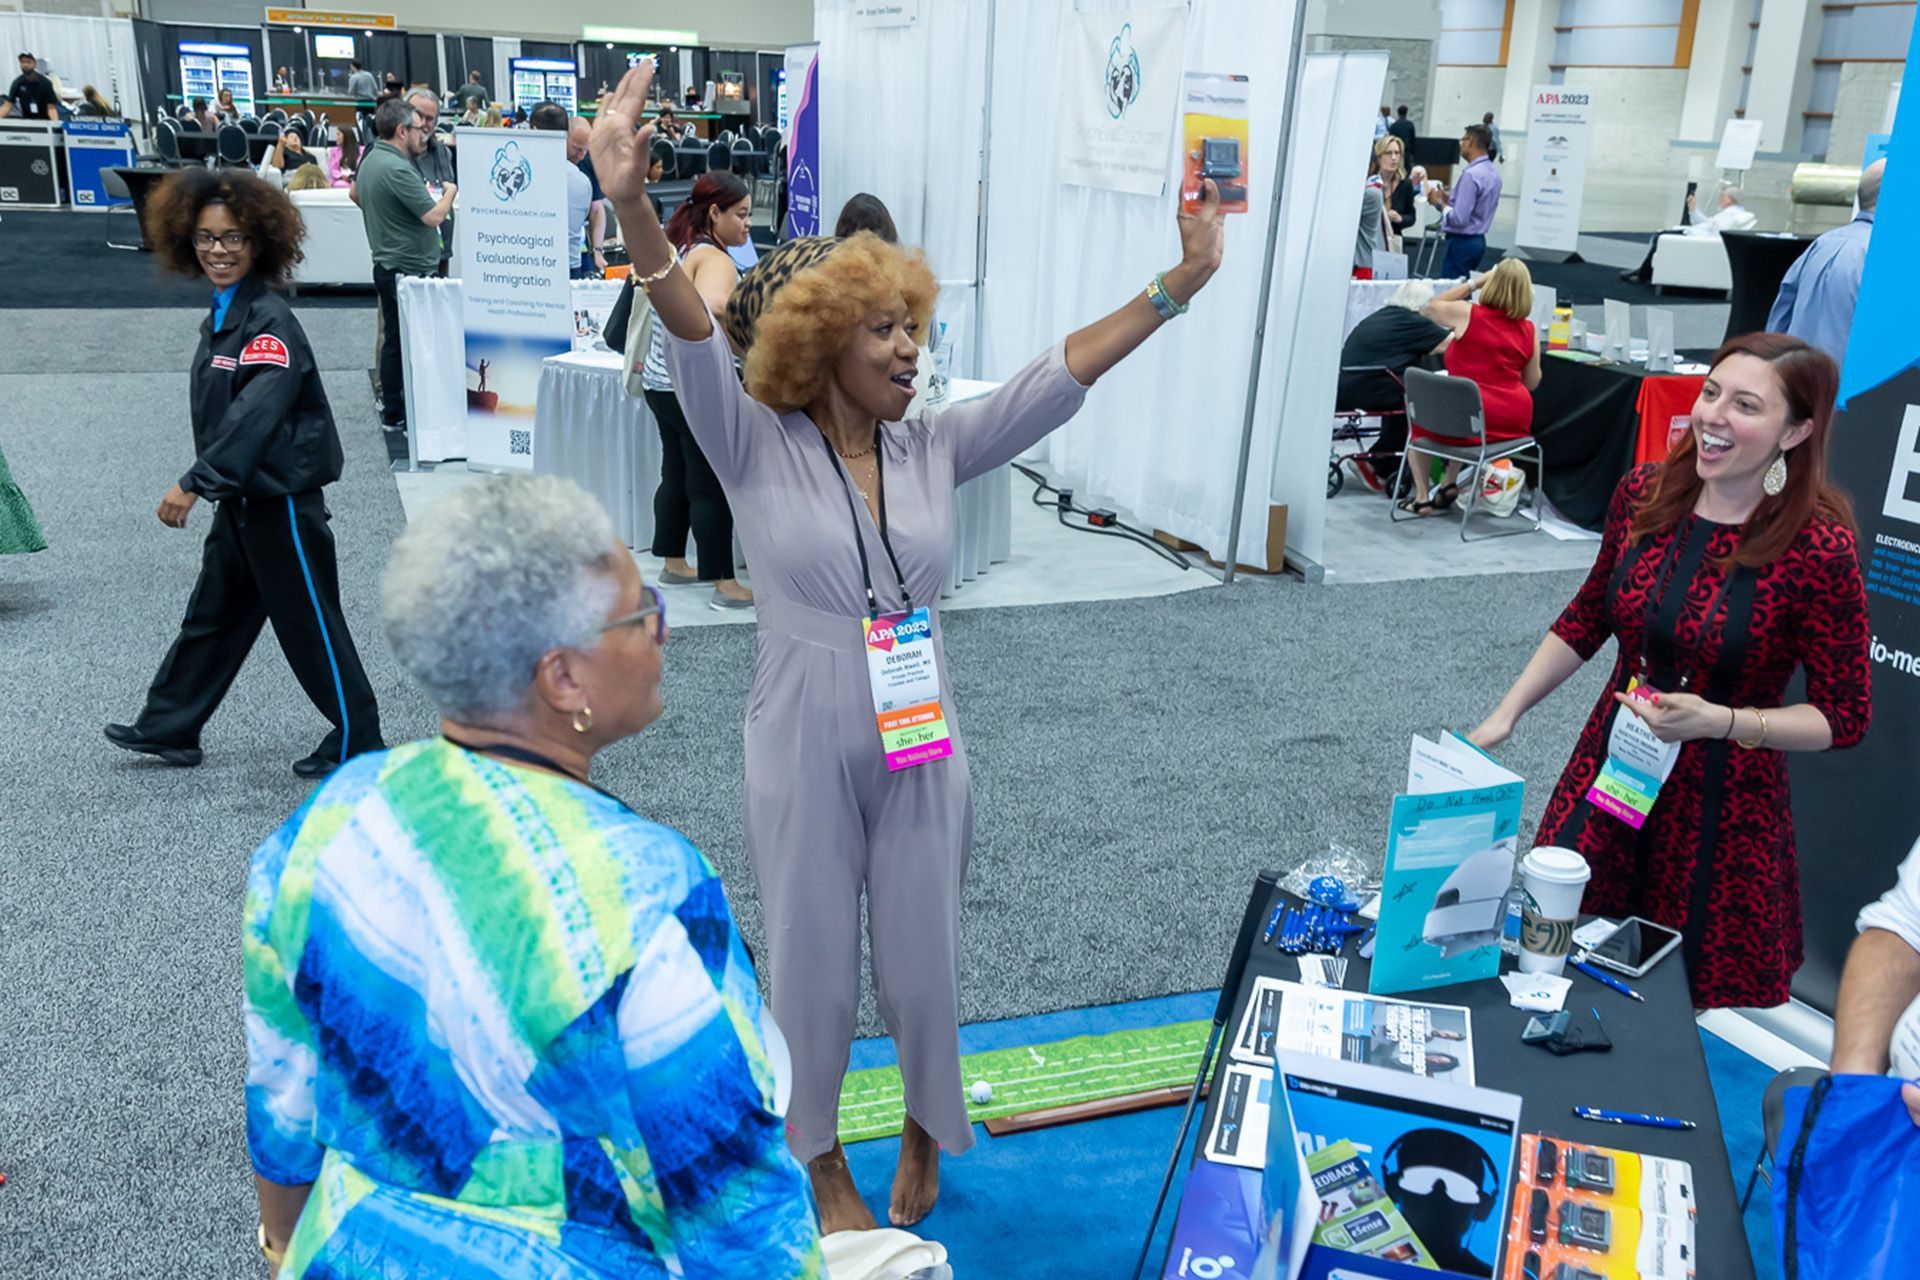 A group of women are standing around a table at a convention.